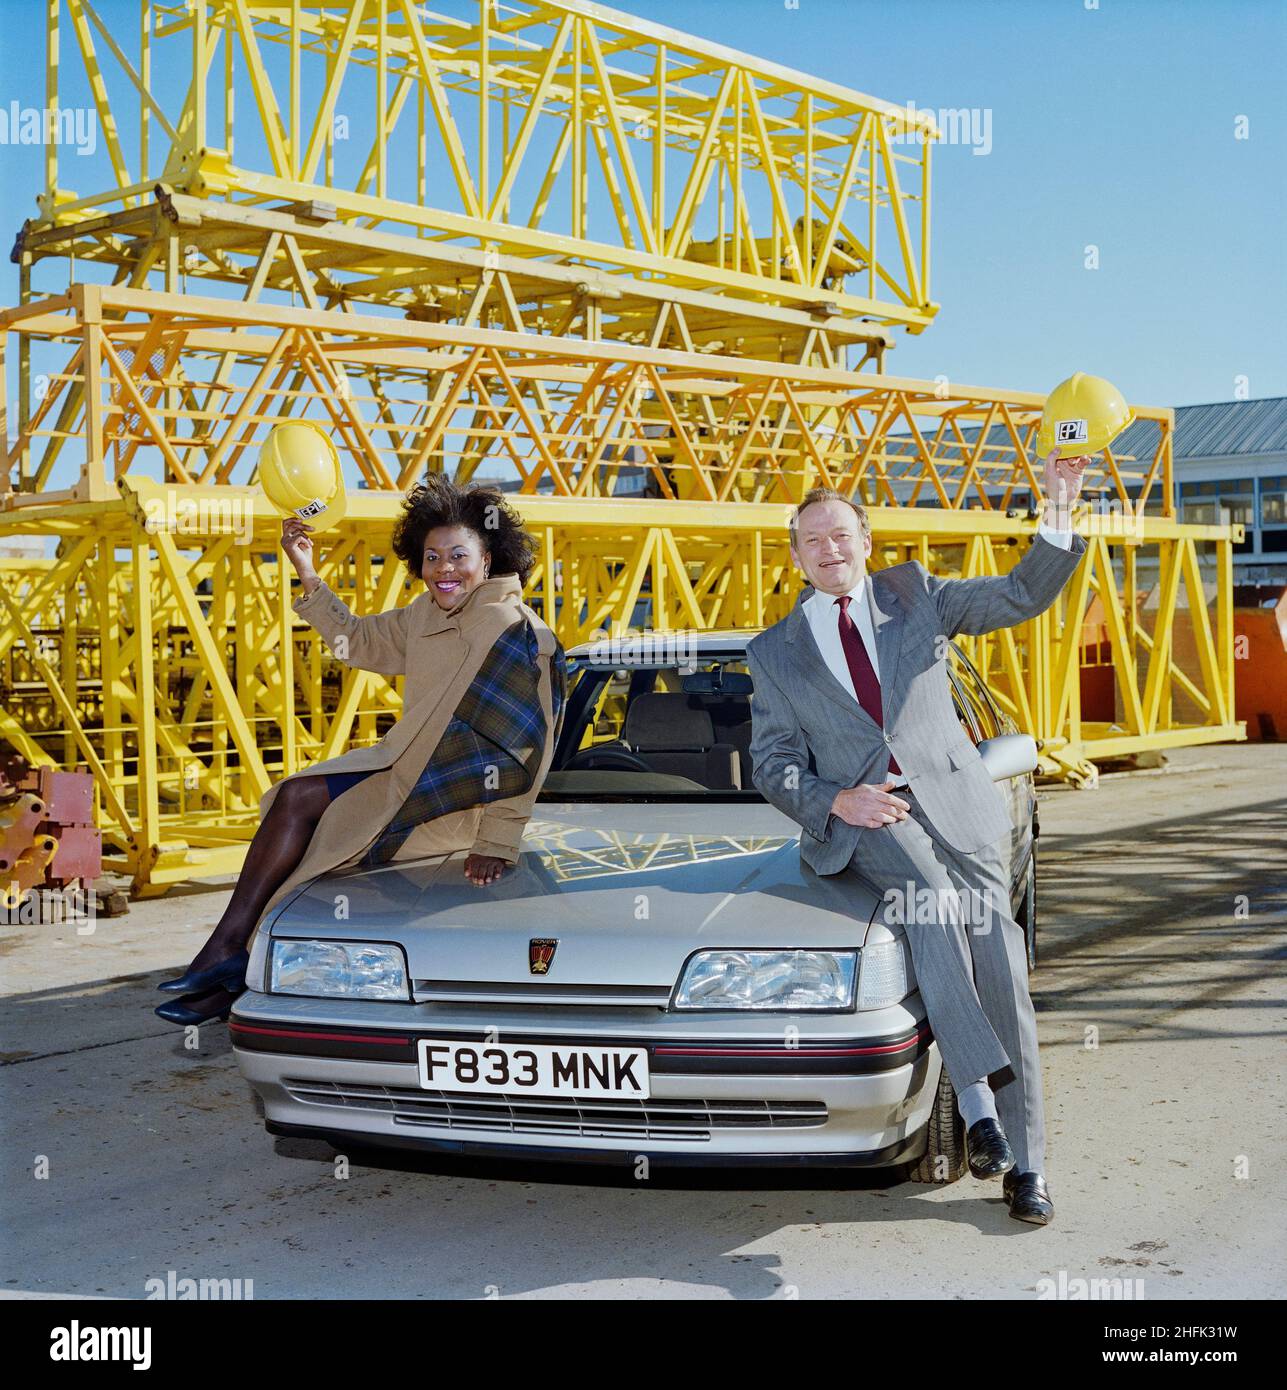 Borehamwood, Elstree and Borehamwood, Hertsmere, Hertfordshire, 23/02/1989. EPL Managing Director Derek Welsh and Olympic athlete Tessa Sanderson posing on the bonnet of her sponsored Rover car, presumably at the EPL depot in Borehamwood. Tessa Sanderson had a sponsorship deal with EPL, part of the Laing Group. Stock Photo